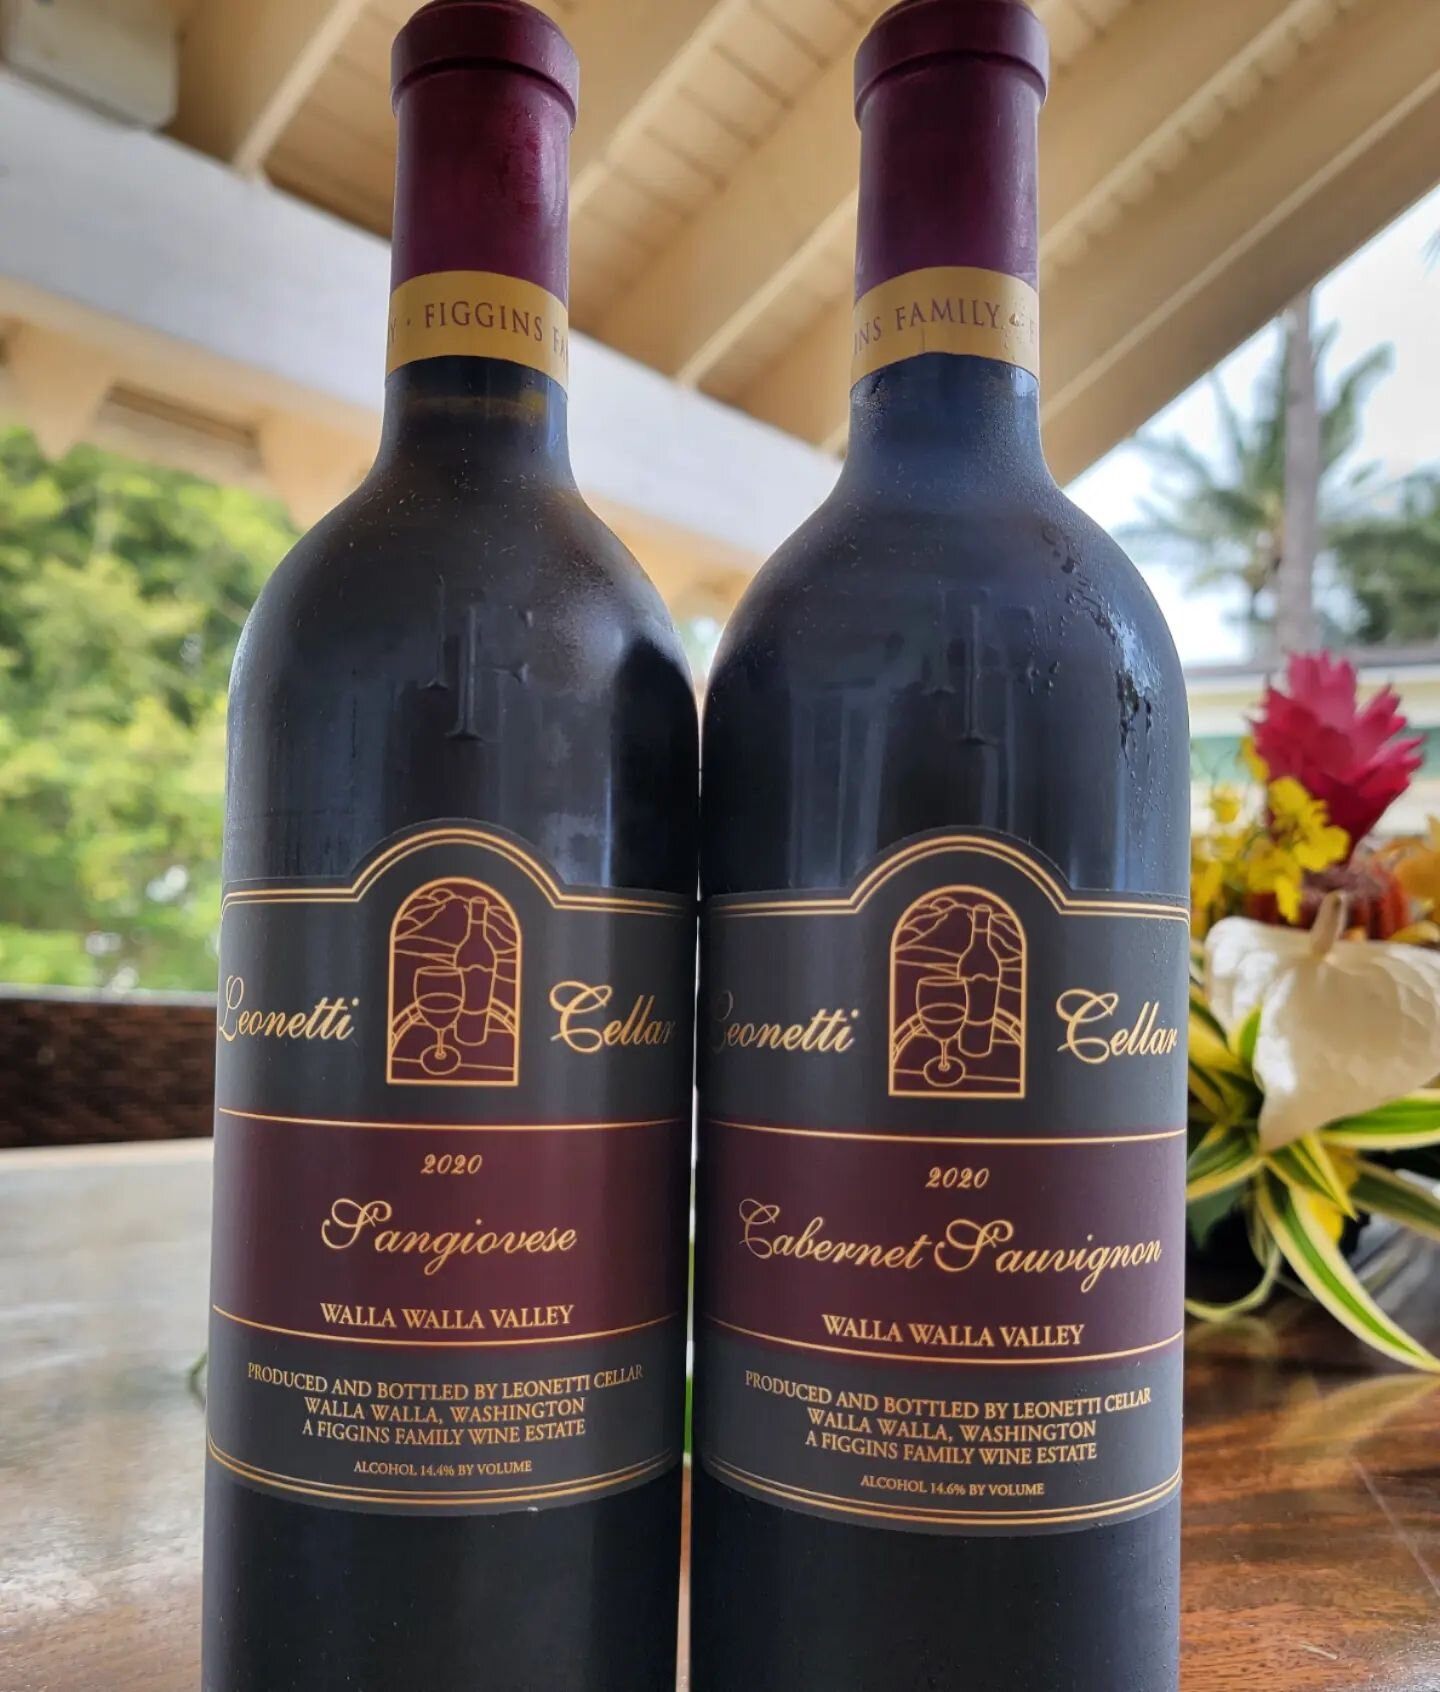 Leonetti Cellars Cabernet Sauvignon 2020

Leonetti Cellars Sangiovese 2020

&quot;A vineyard is nothing without the soil upon which it rests and sends its roots.&quot;

&quot;The soil provides each vine with the anchor of foundation, nutrition, water